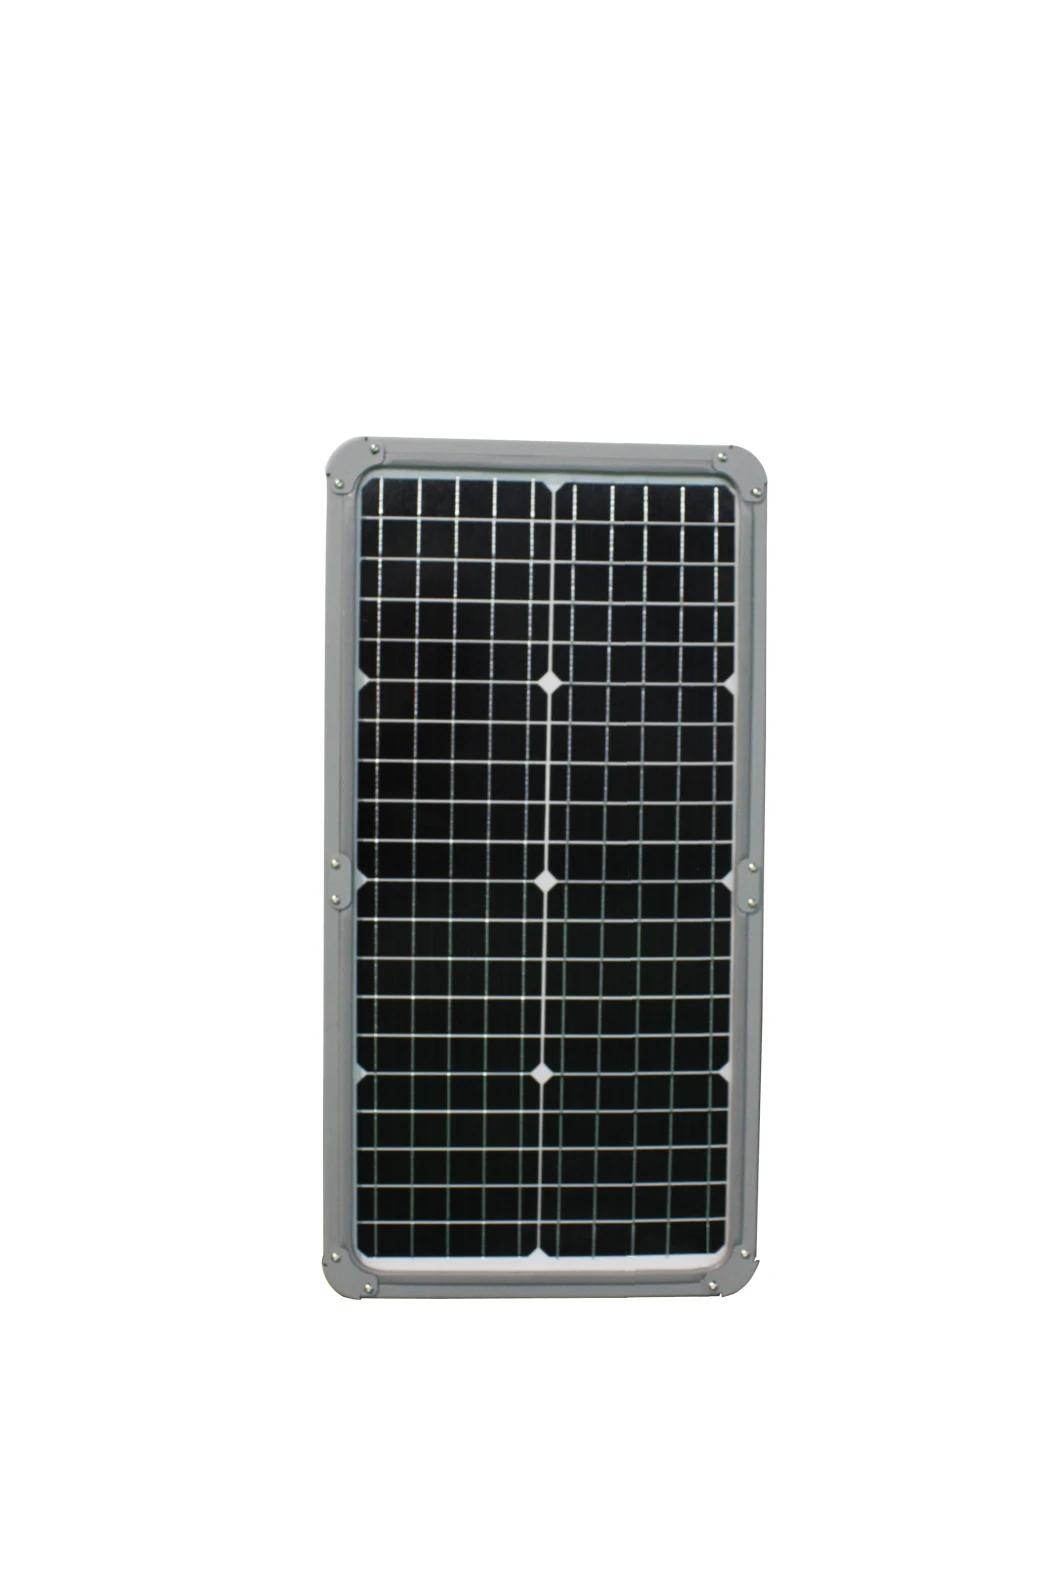 All-in-One IP66 PWM MPPT Controller 30W 50W 60W 80W 100W Luminaries LED Solar Street Light Solar Garden Light with Motion Sensor CE and RoHS